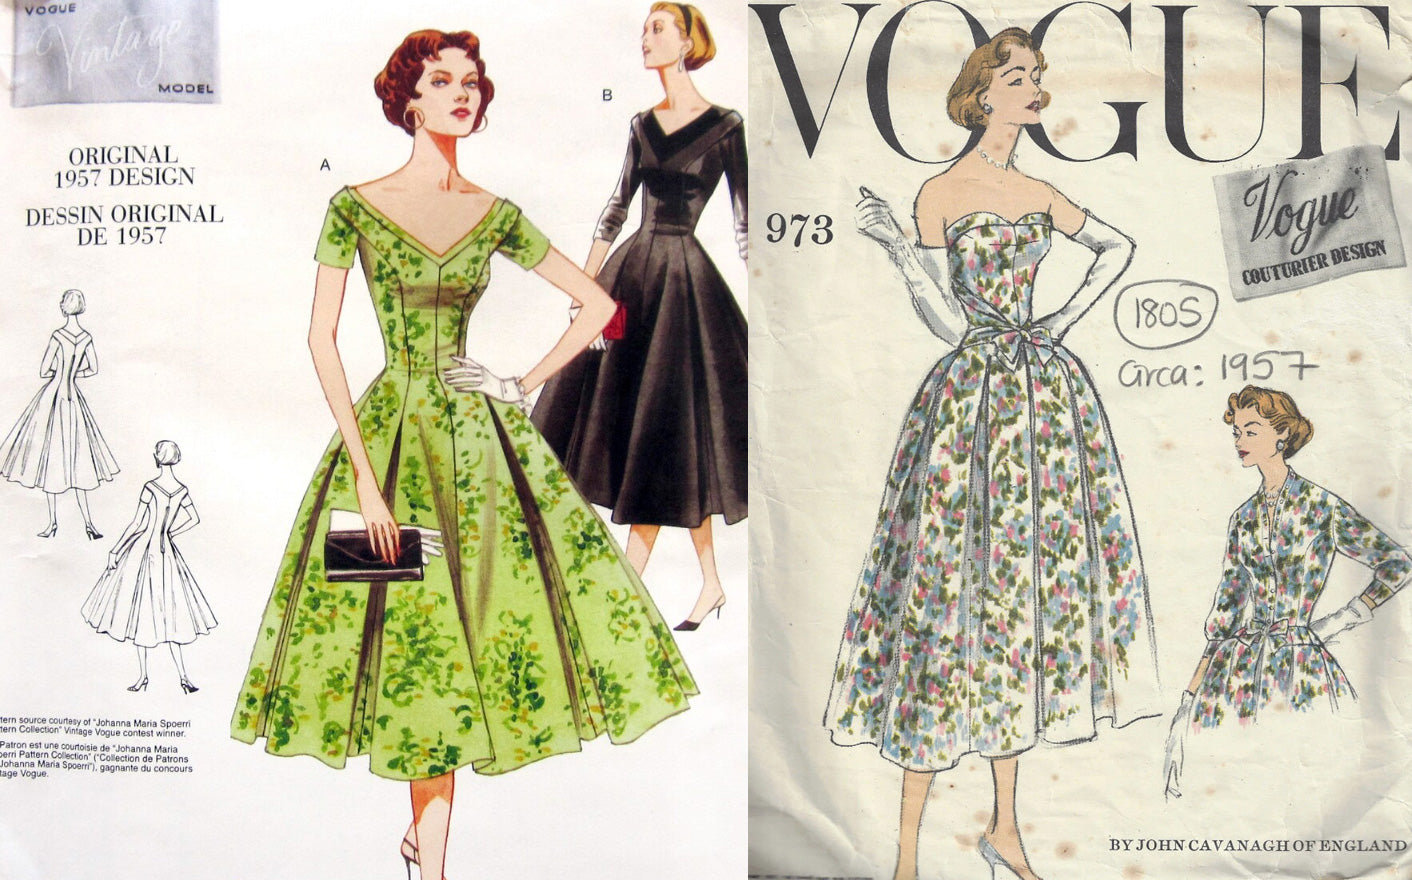 Complete Your Look 1950s – RevivalVintage